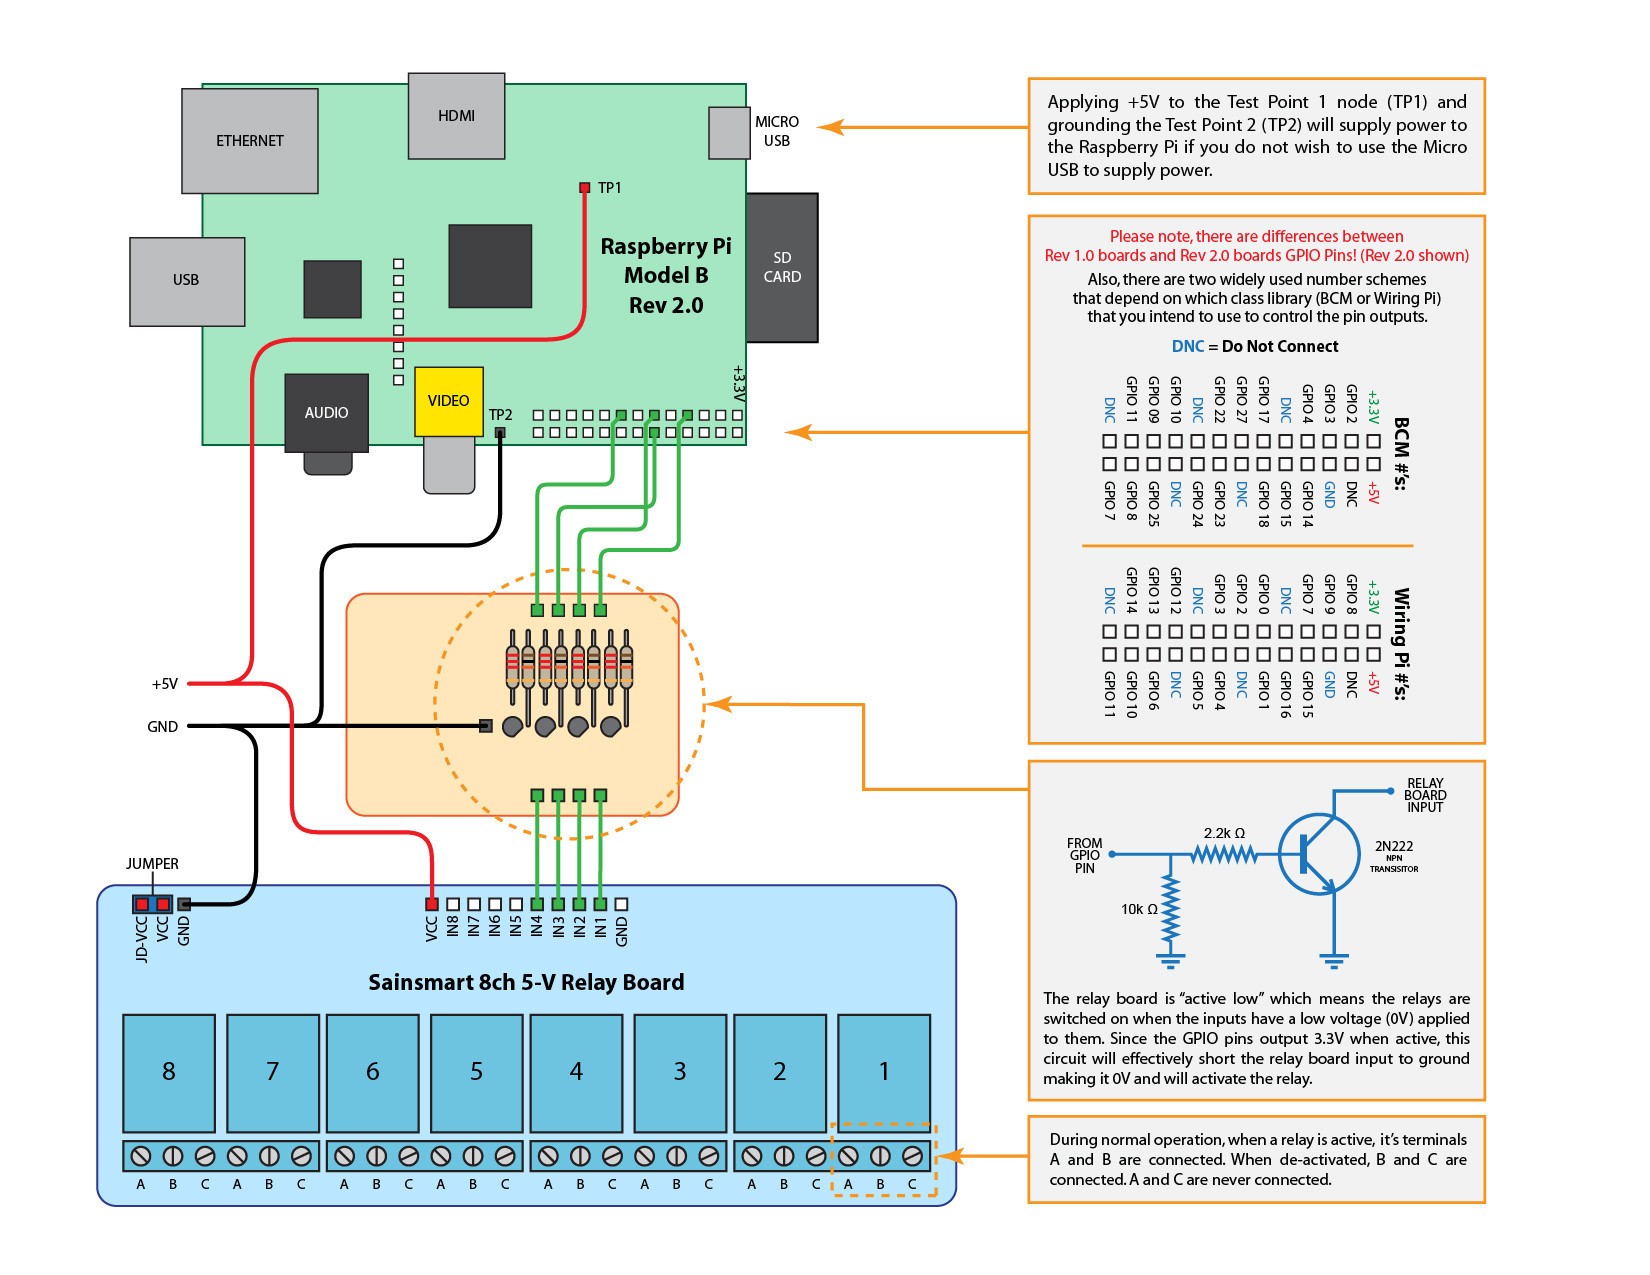 Wiring Diagram Relay Circuit Fresh How To Wire A Raspberry Pi To A Sainsmart 5v Relay Board Raspberry